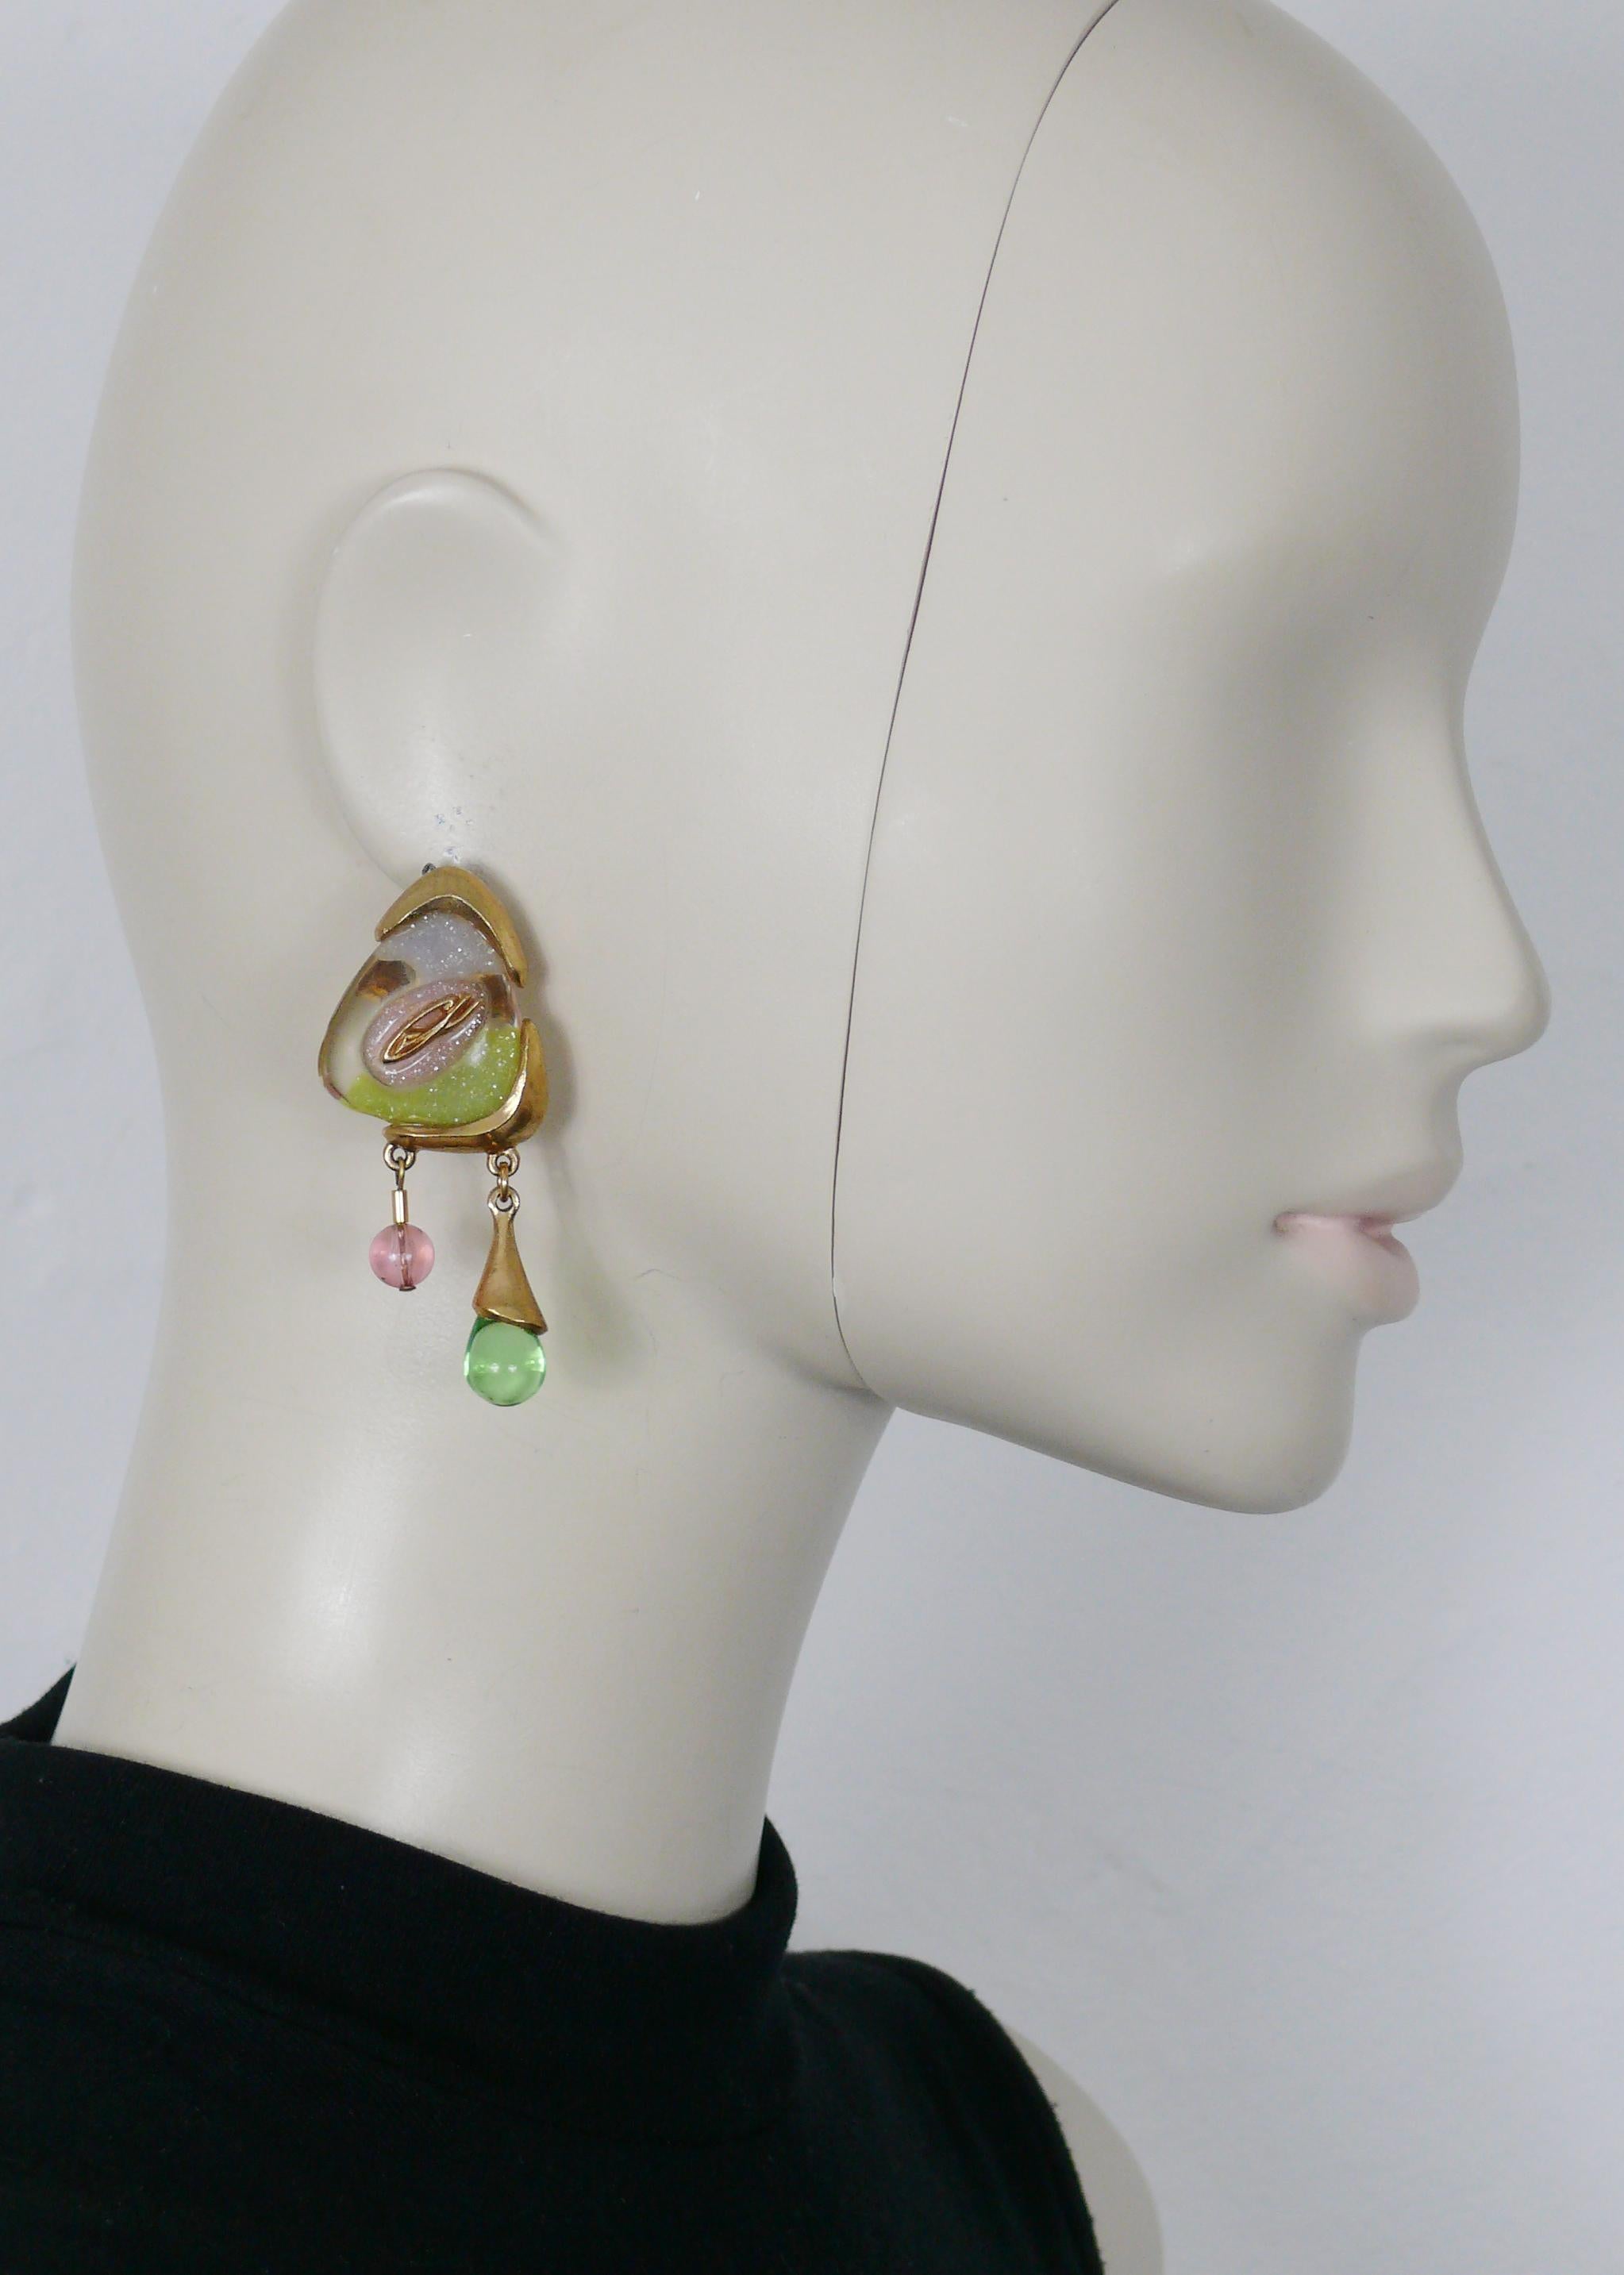 CHRISTIAN LACROIX vintage gold tone abstract design dangling earrings (clip-on) featuring a large clear resin cabochon with glitter inlaids, CL logo and two glass bead charms.

Marked CHRISTIAN LACROIX CL Made in France.

Indicative measurements :